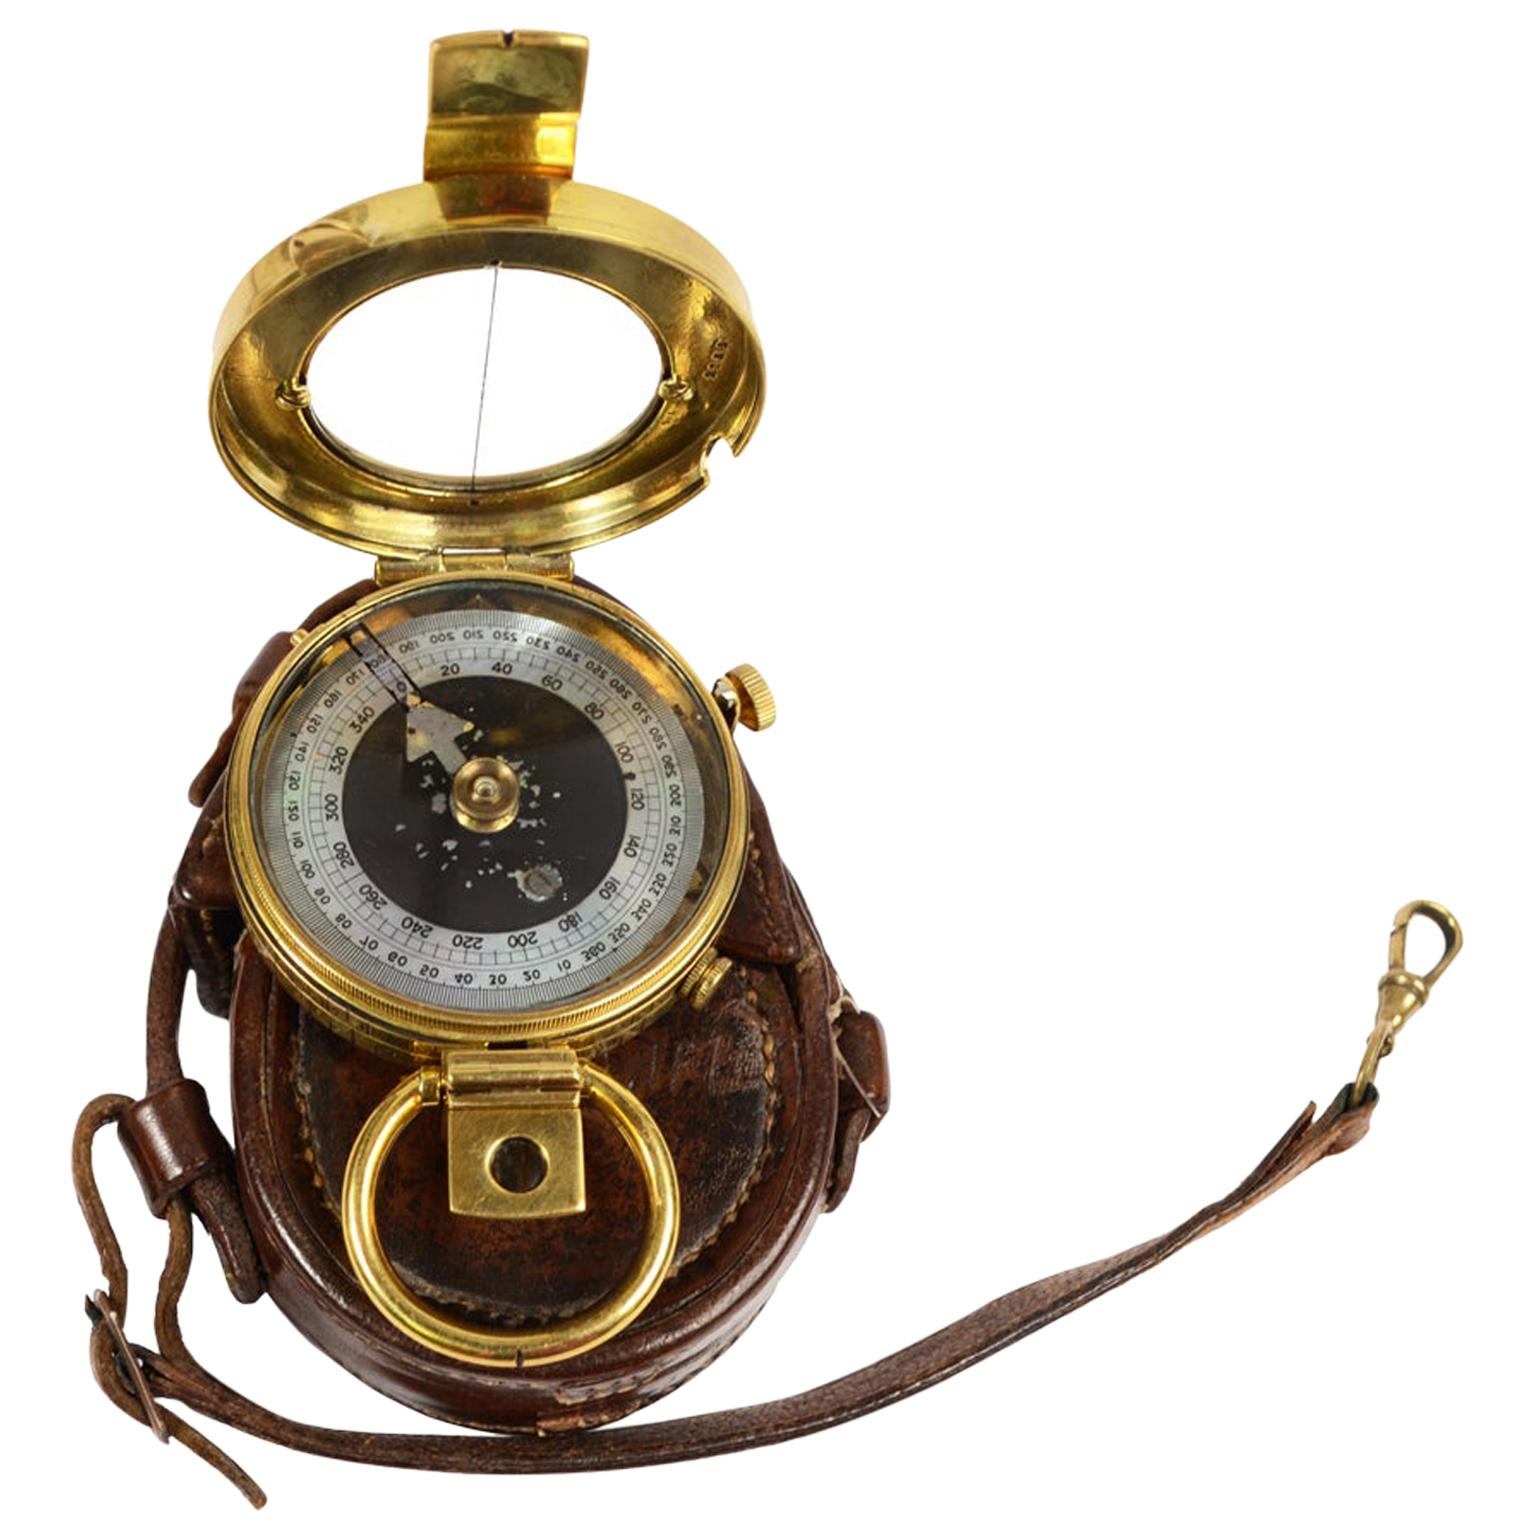 Details about   Antique Brass Made For Royal Navy Compass Vintage Marine Compass w/ Leather Case 